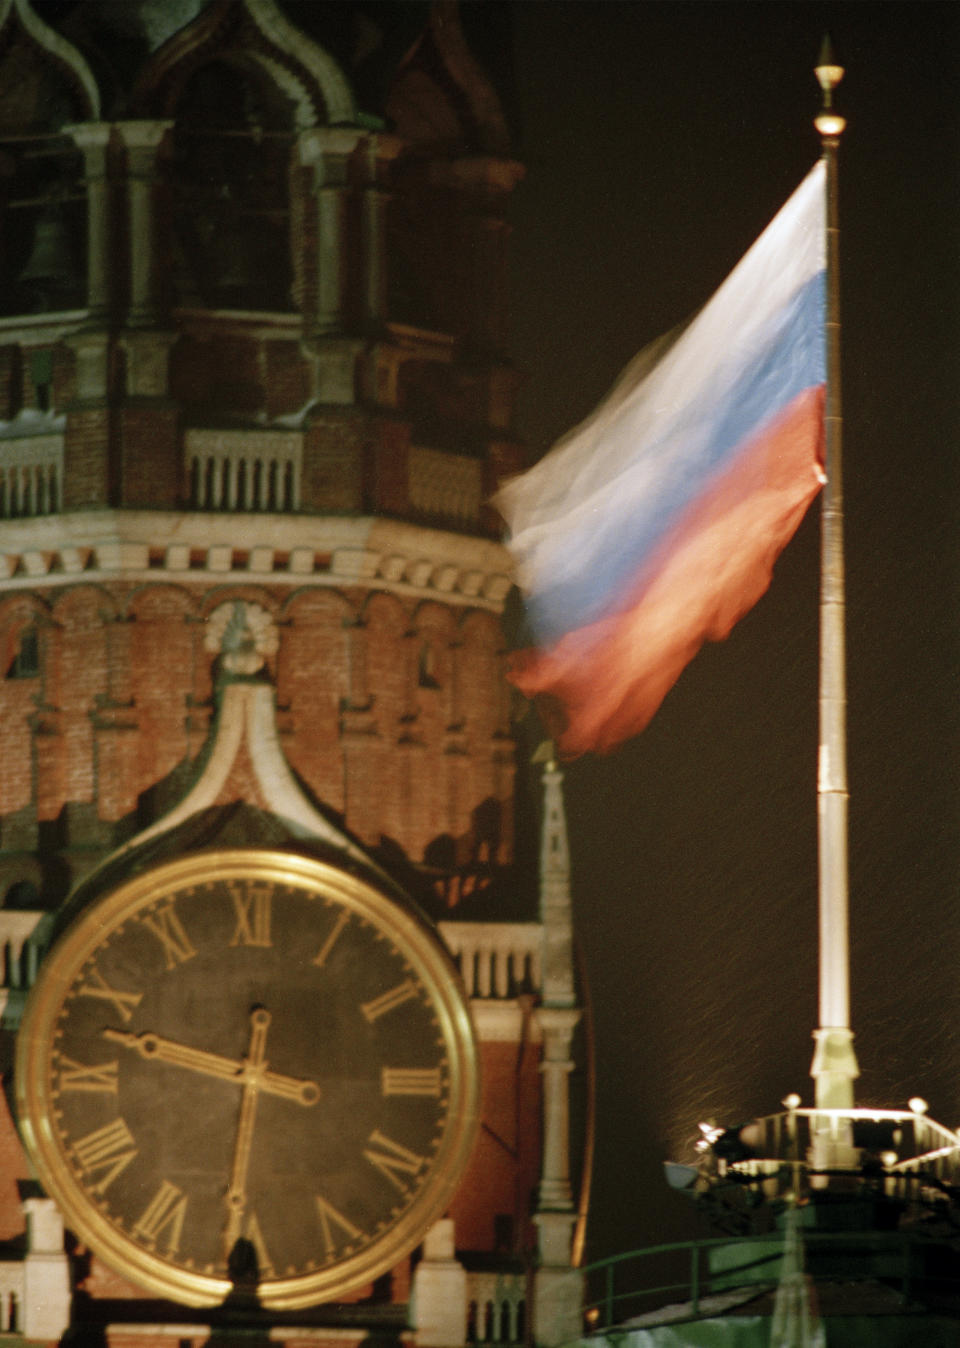 FILE - The newly-raised Russian flag flutters in the wind over the Kremlin in Moscow in place of the Soviet flag which was removed immediately after the resignation of Soviet Mikhail Gorbachev, on Wednesday, Dec. 25, 1991. After Soviet President Mikhail Gorbachev stepped down on Dec. 25, 1991, people strolling across Moscow's snowy Red Square on the evening of Dec. 25 were surprised to witness one of the 20th century’s most pivotal moments — the Soviet red flag over the Kremlin pulled down and replaced with the Russian Federation's tricolor. (AP Photo/Alexander Zemlianichenko, File)